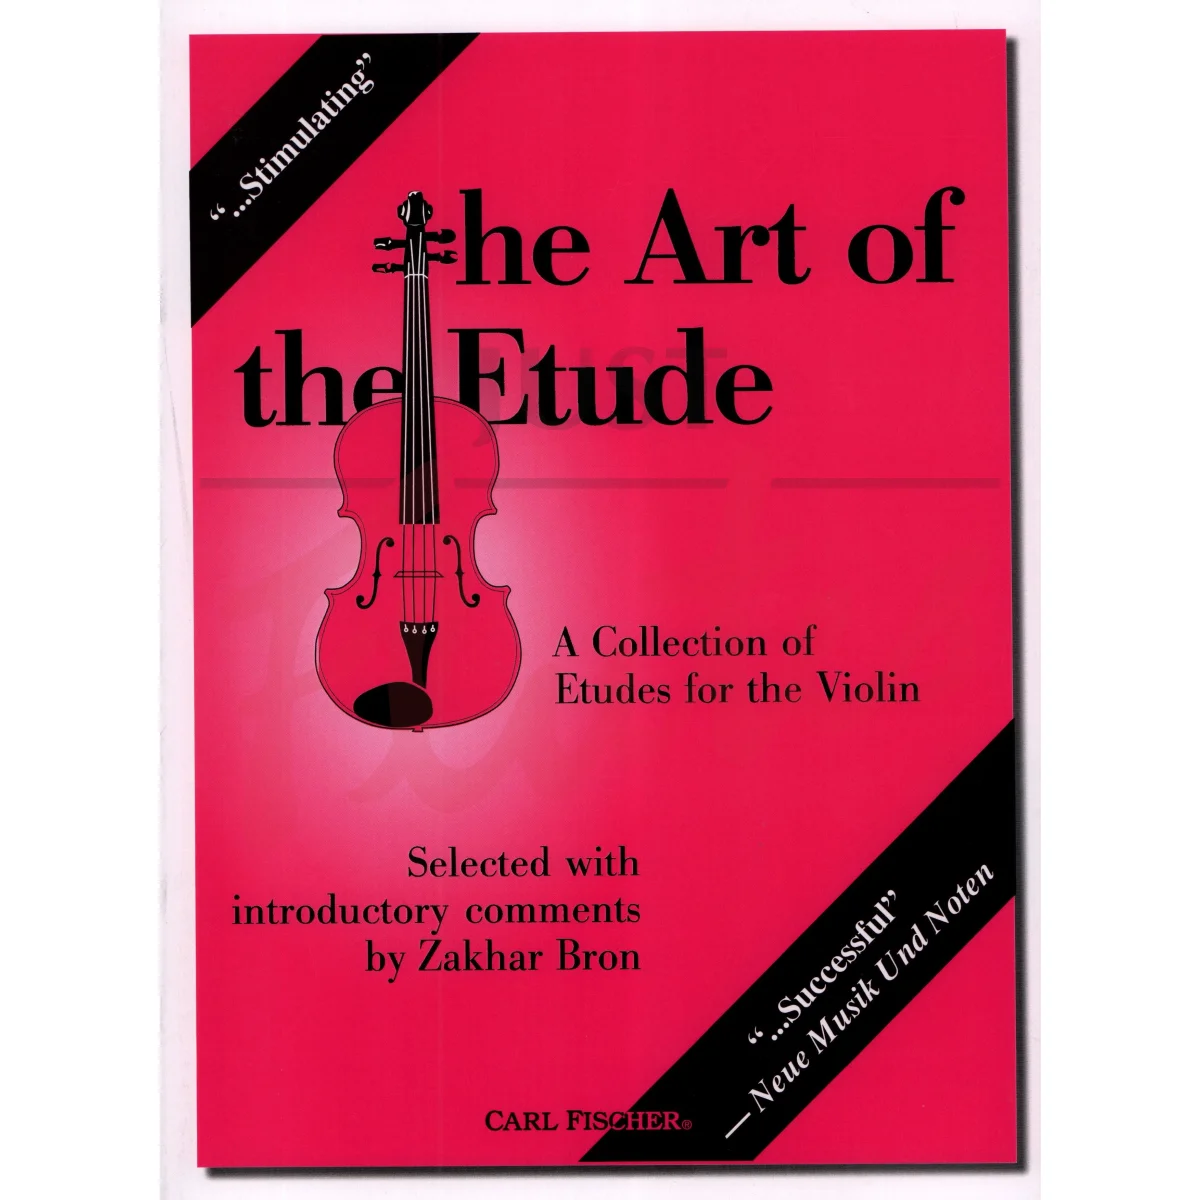 The Art Of The Etude for Violin